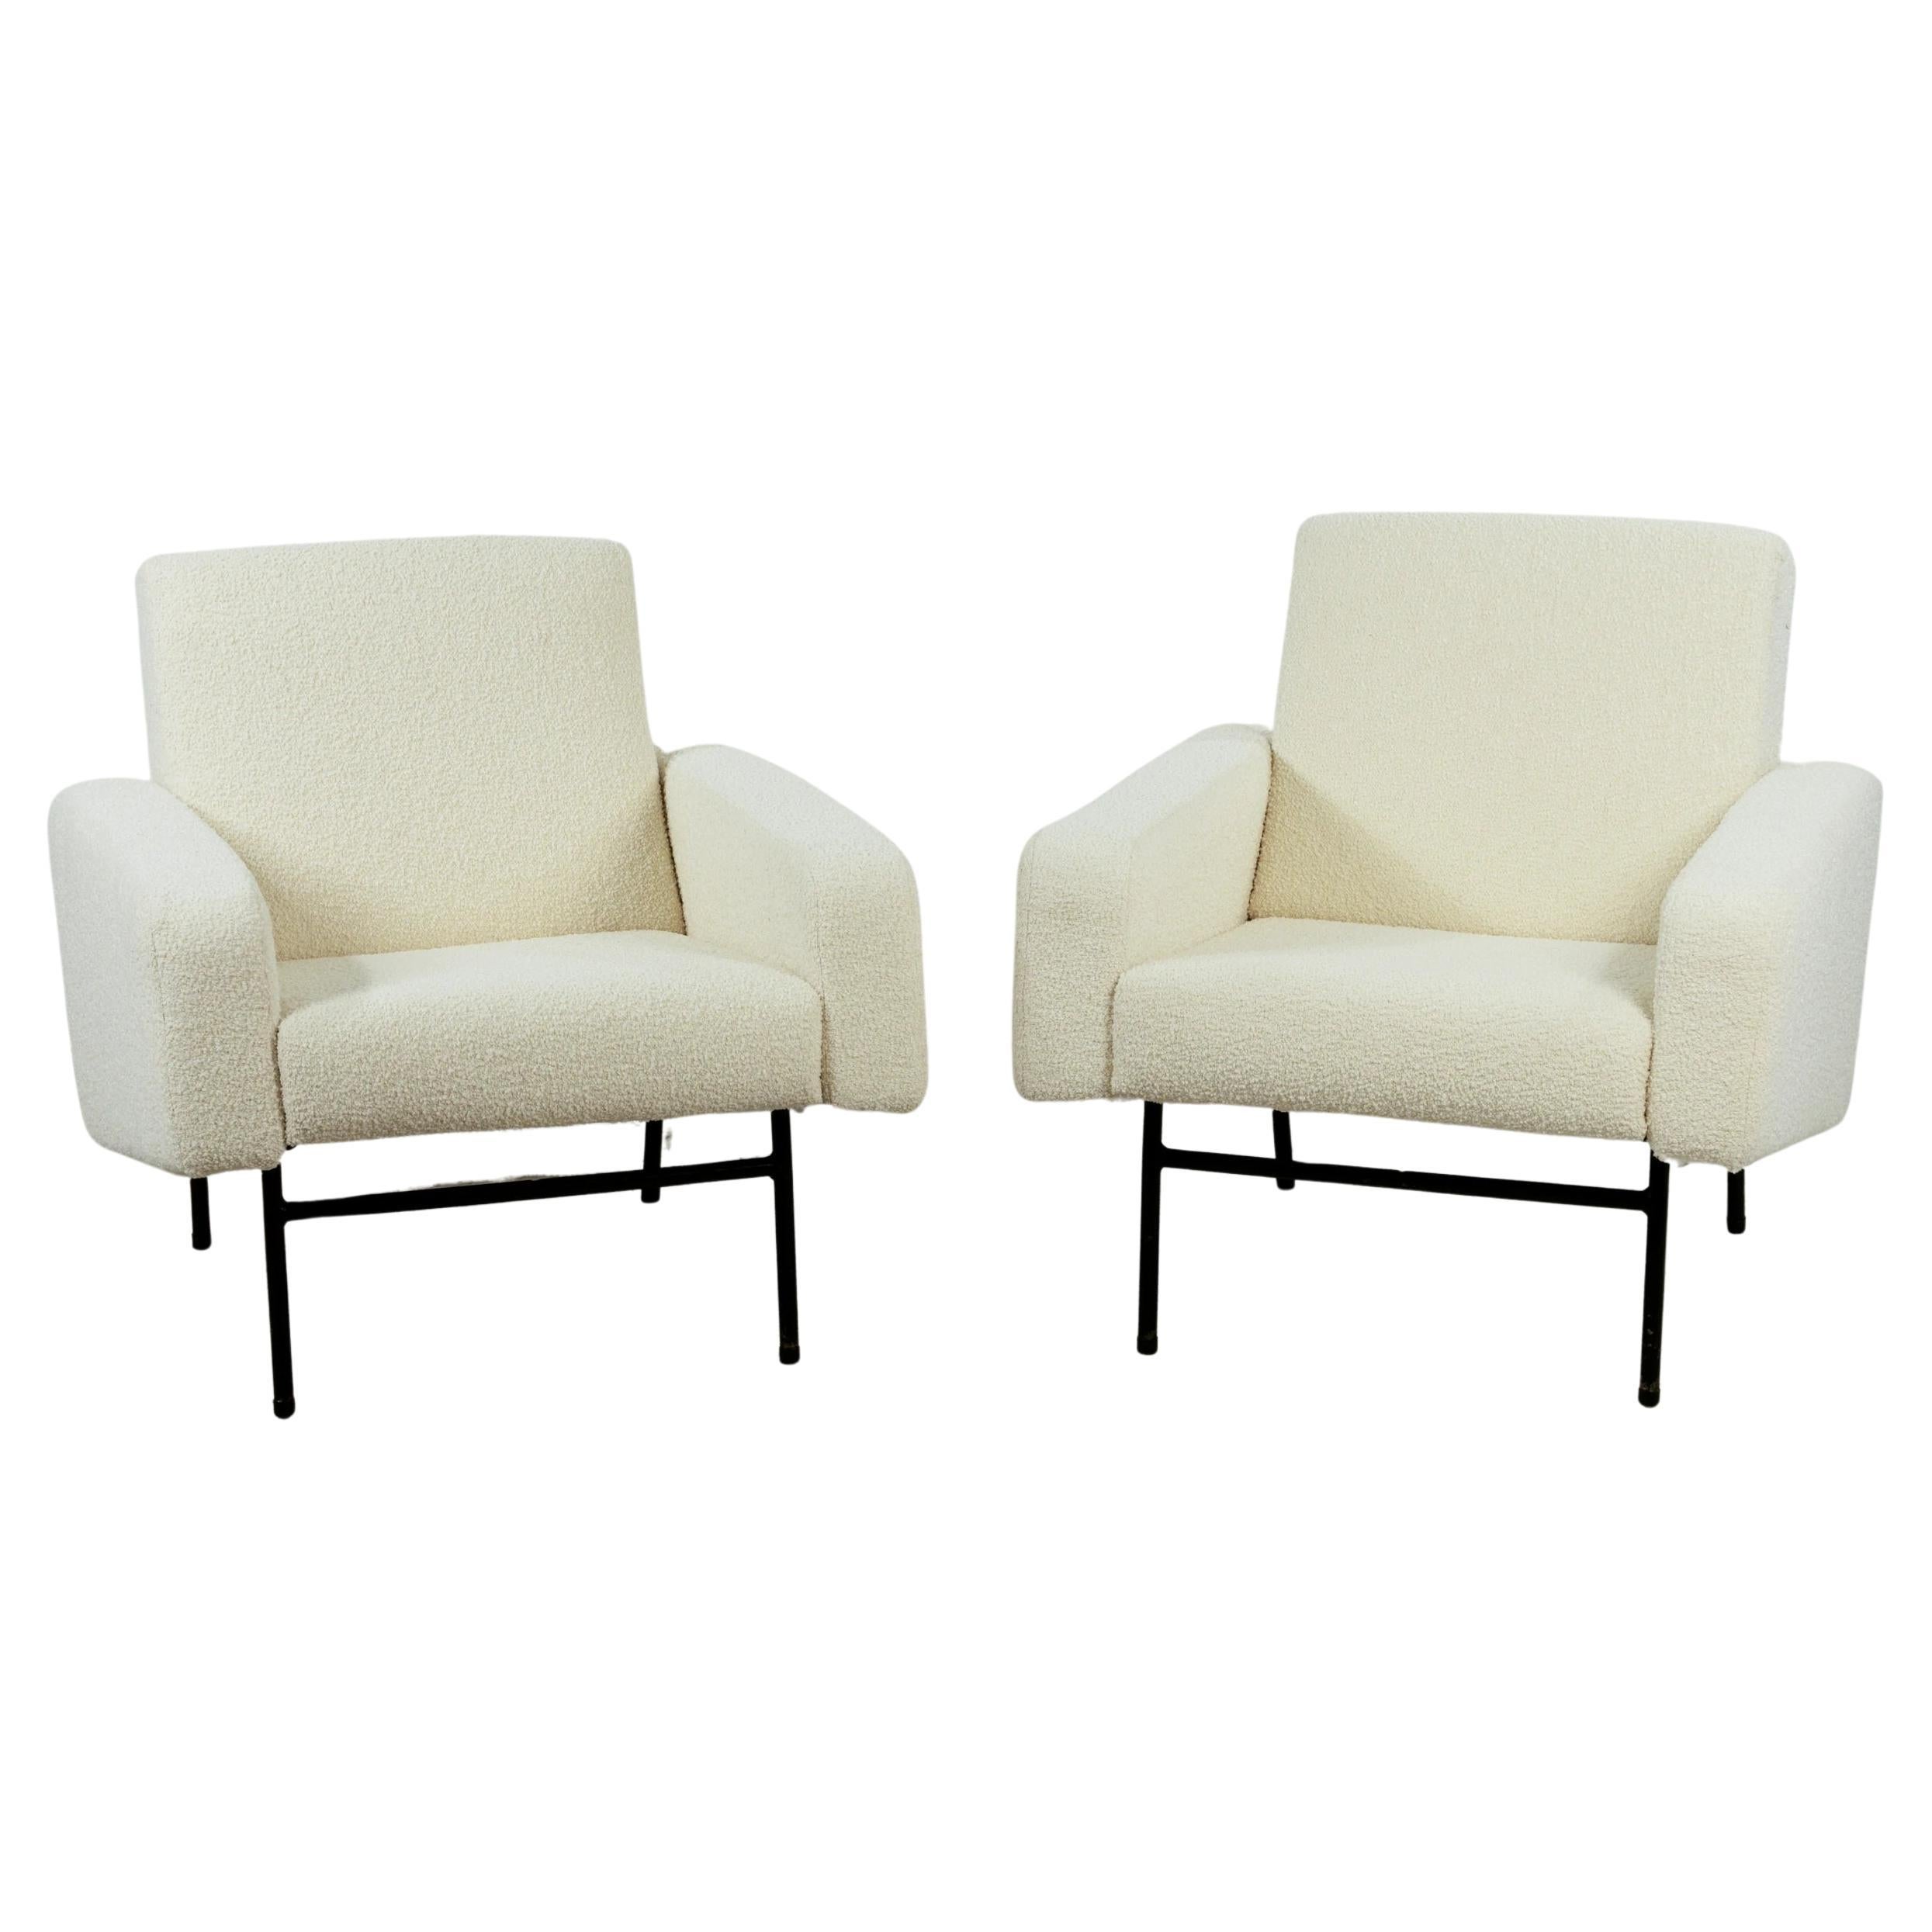 Pair of G 10 armchairs by Pierre Guariche, Editions Airborne, France, circa 1960